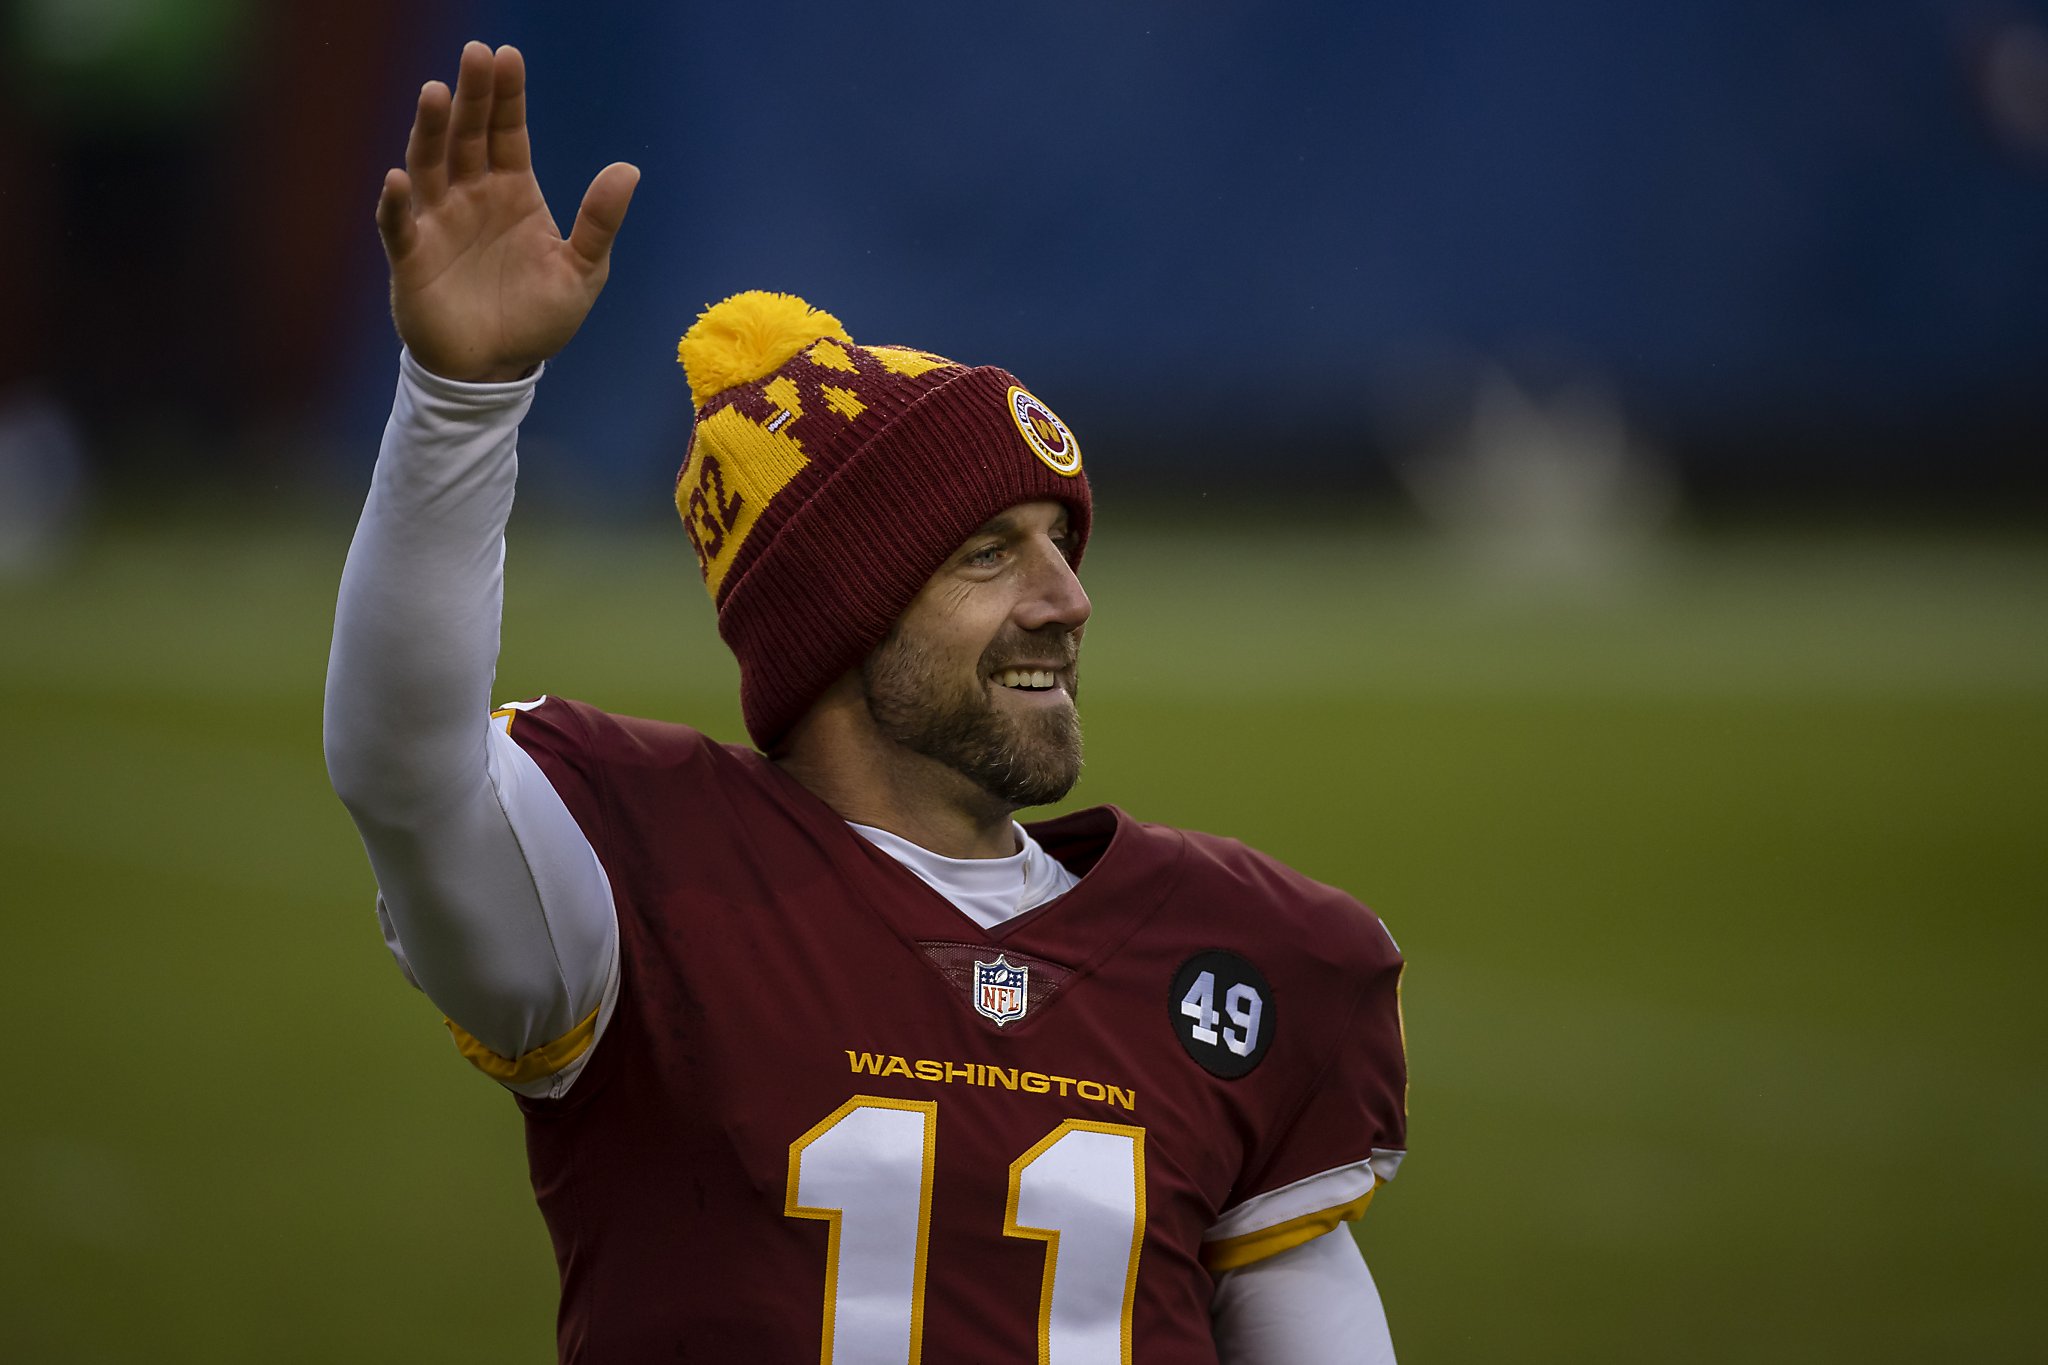 Celebrate Alex Smith's resilience as the former 49ers QB calls it a career